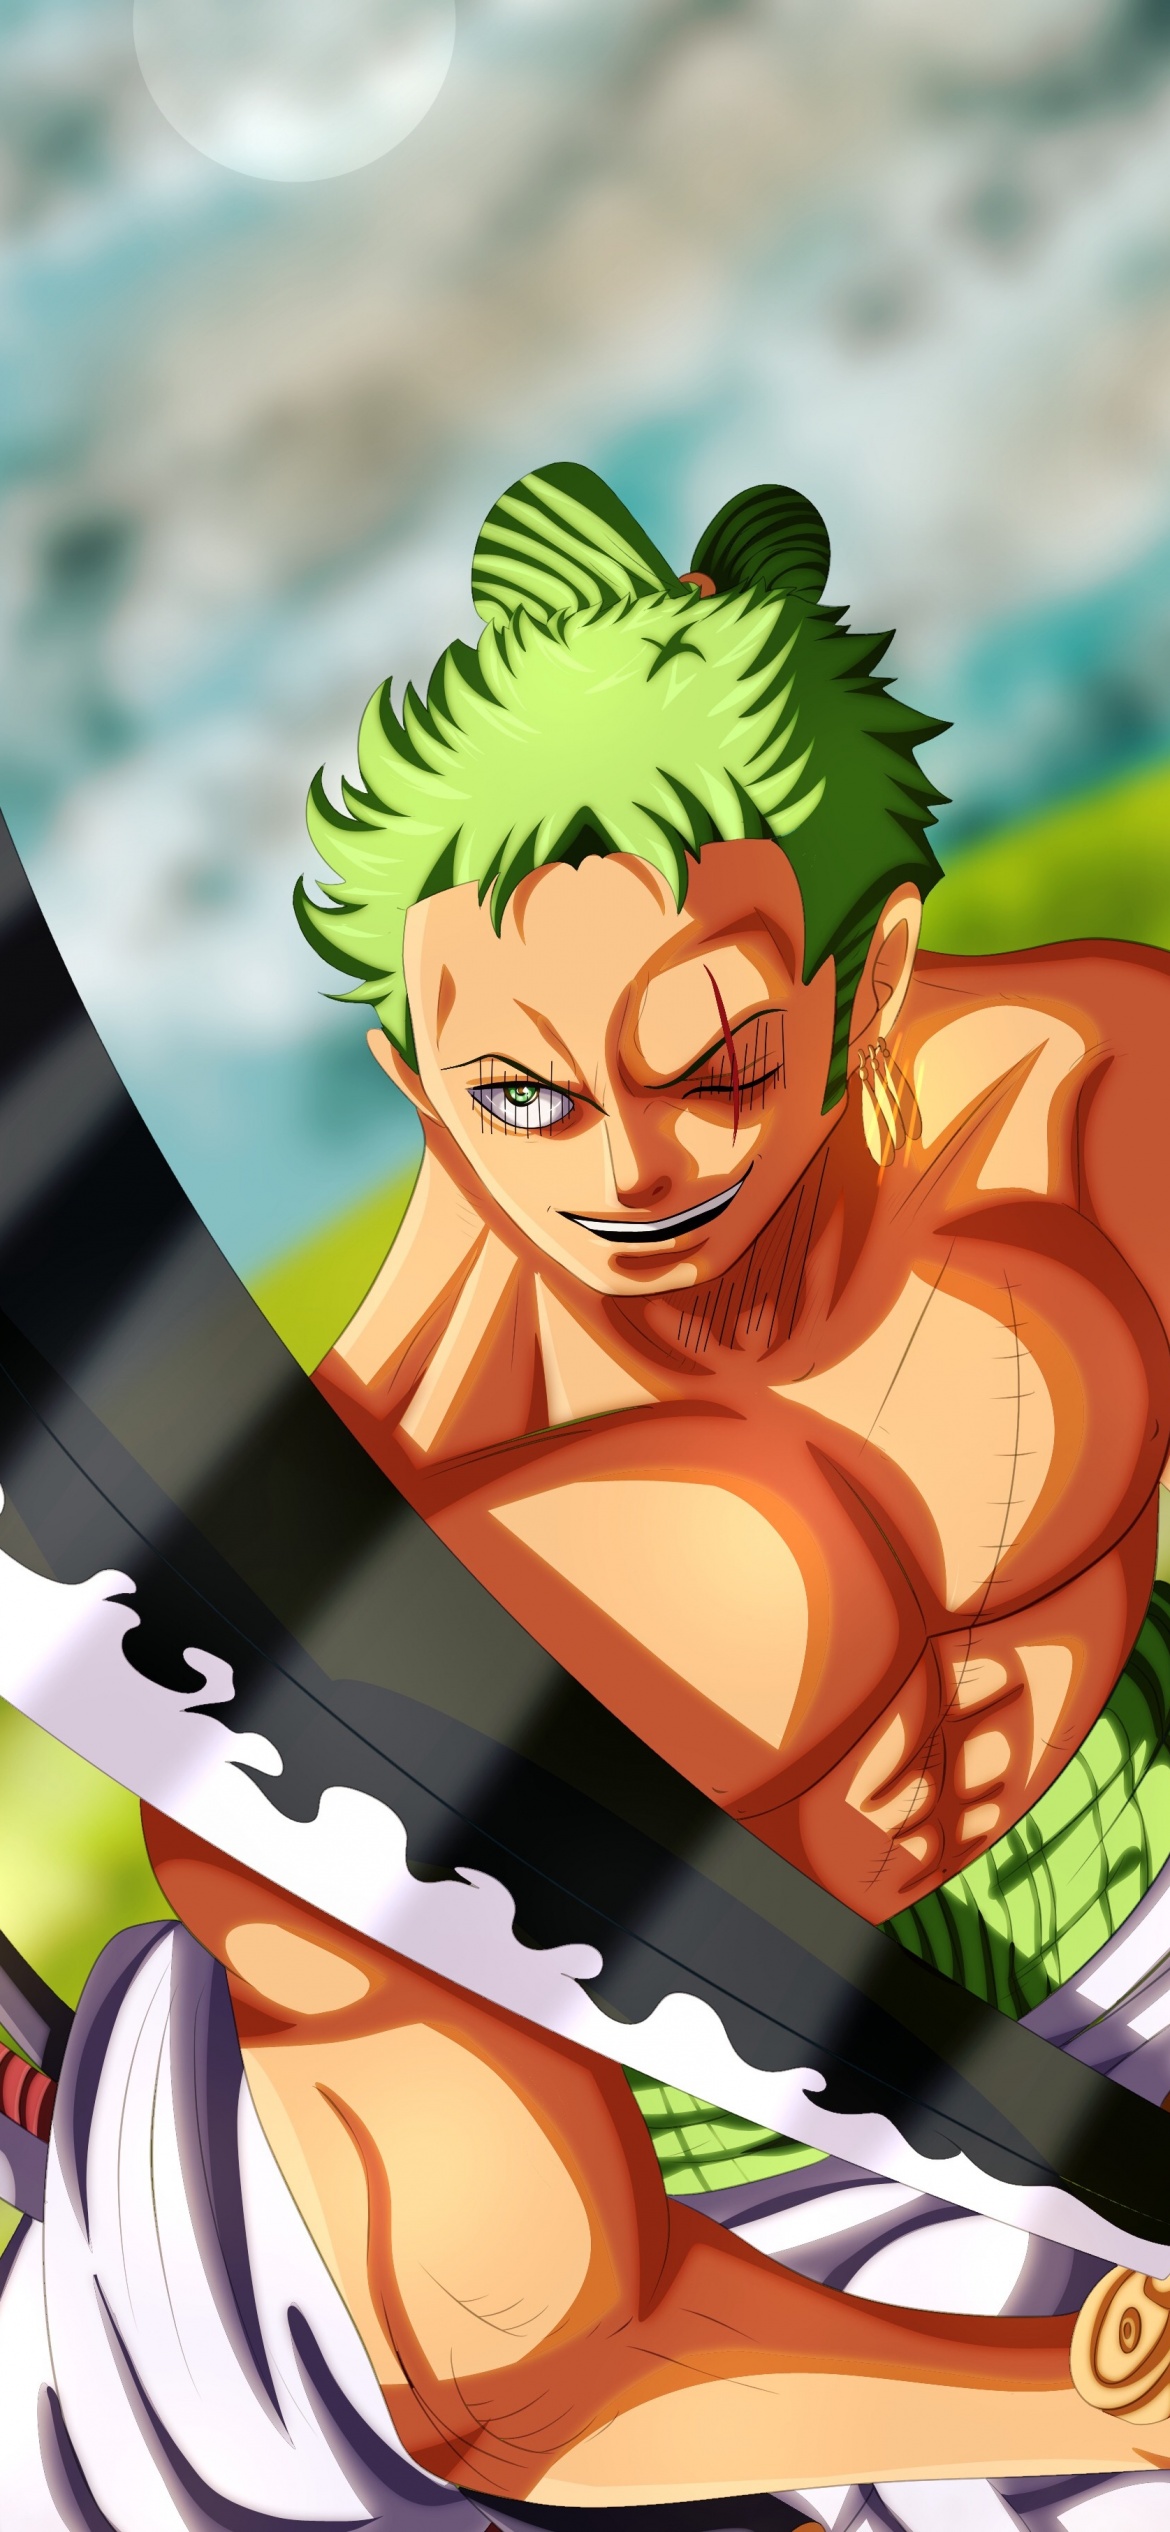 One Piece: 10 Anime Characters Who Would Be A Perfect Match For Zoro